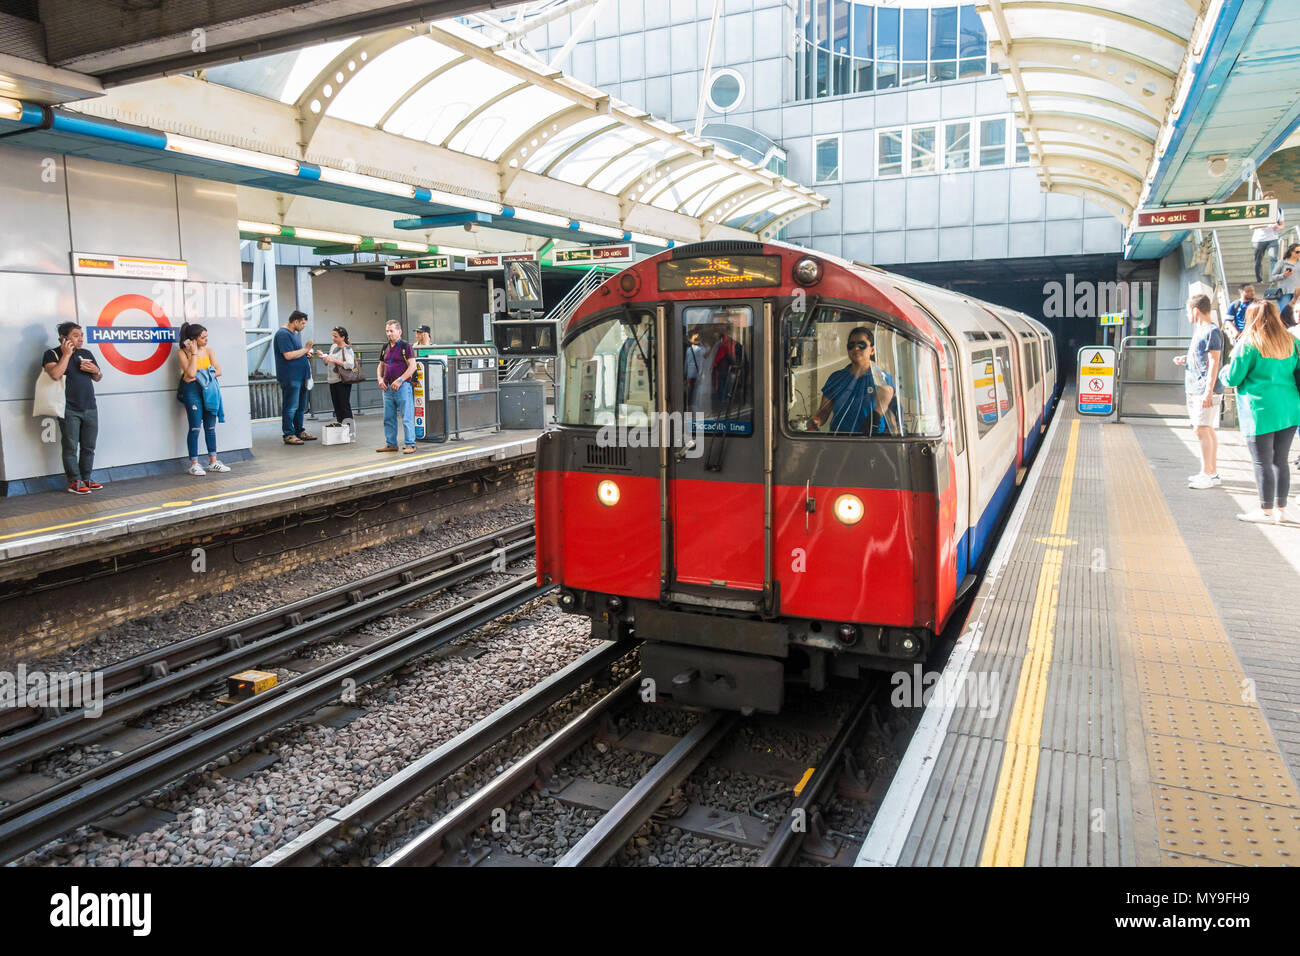 A train arrives into the platform at Hammersmith London Underground Station. Stock Photo